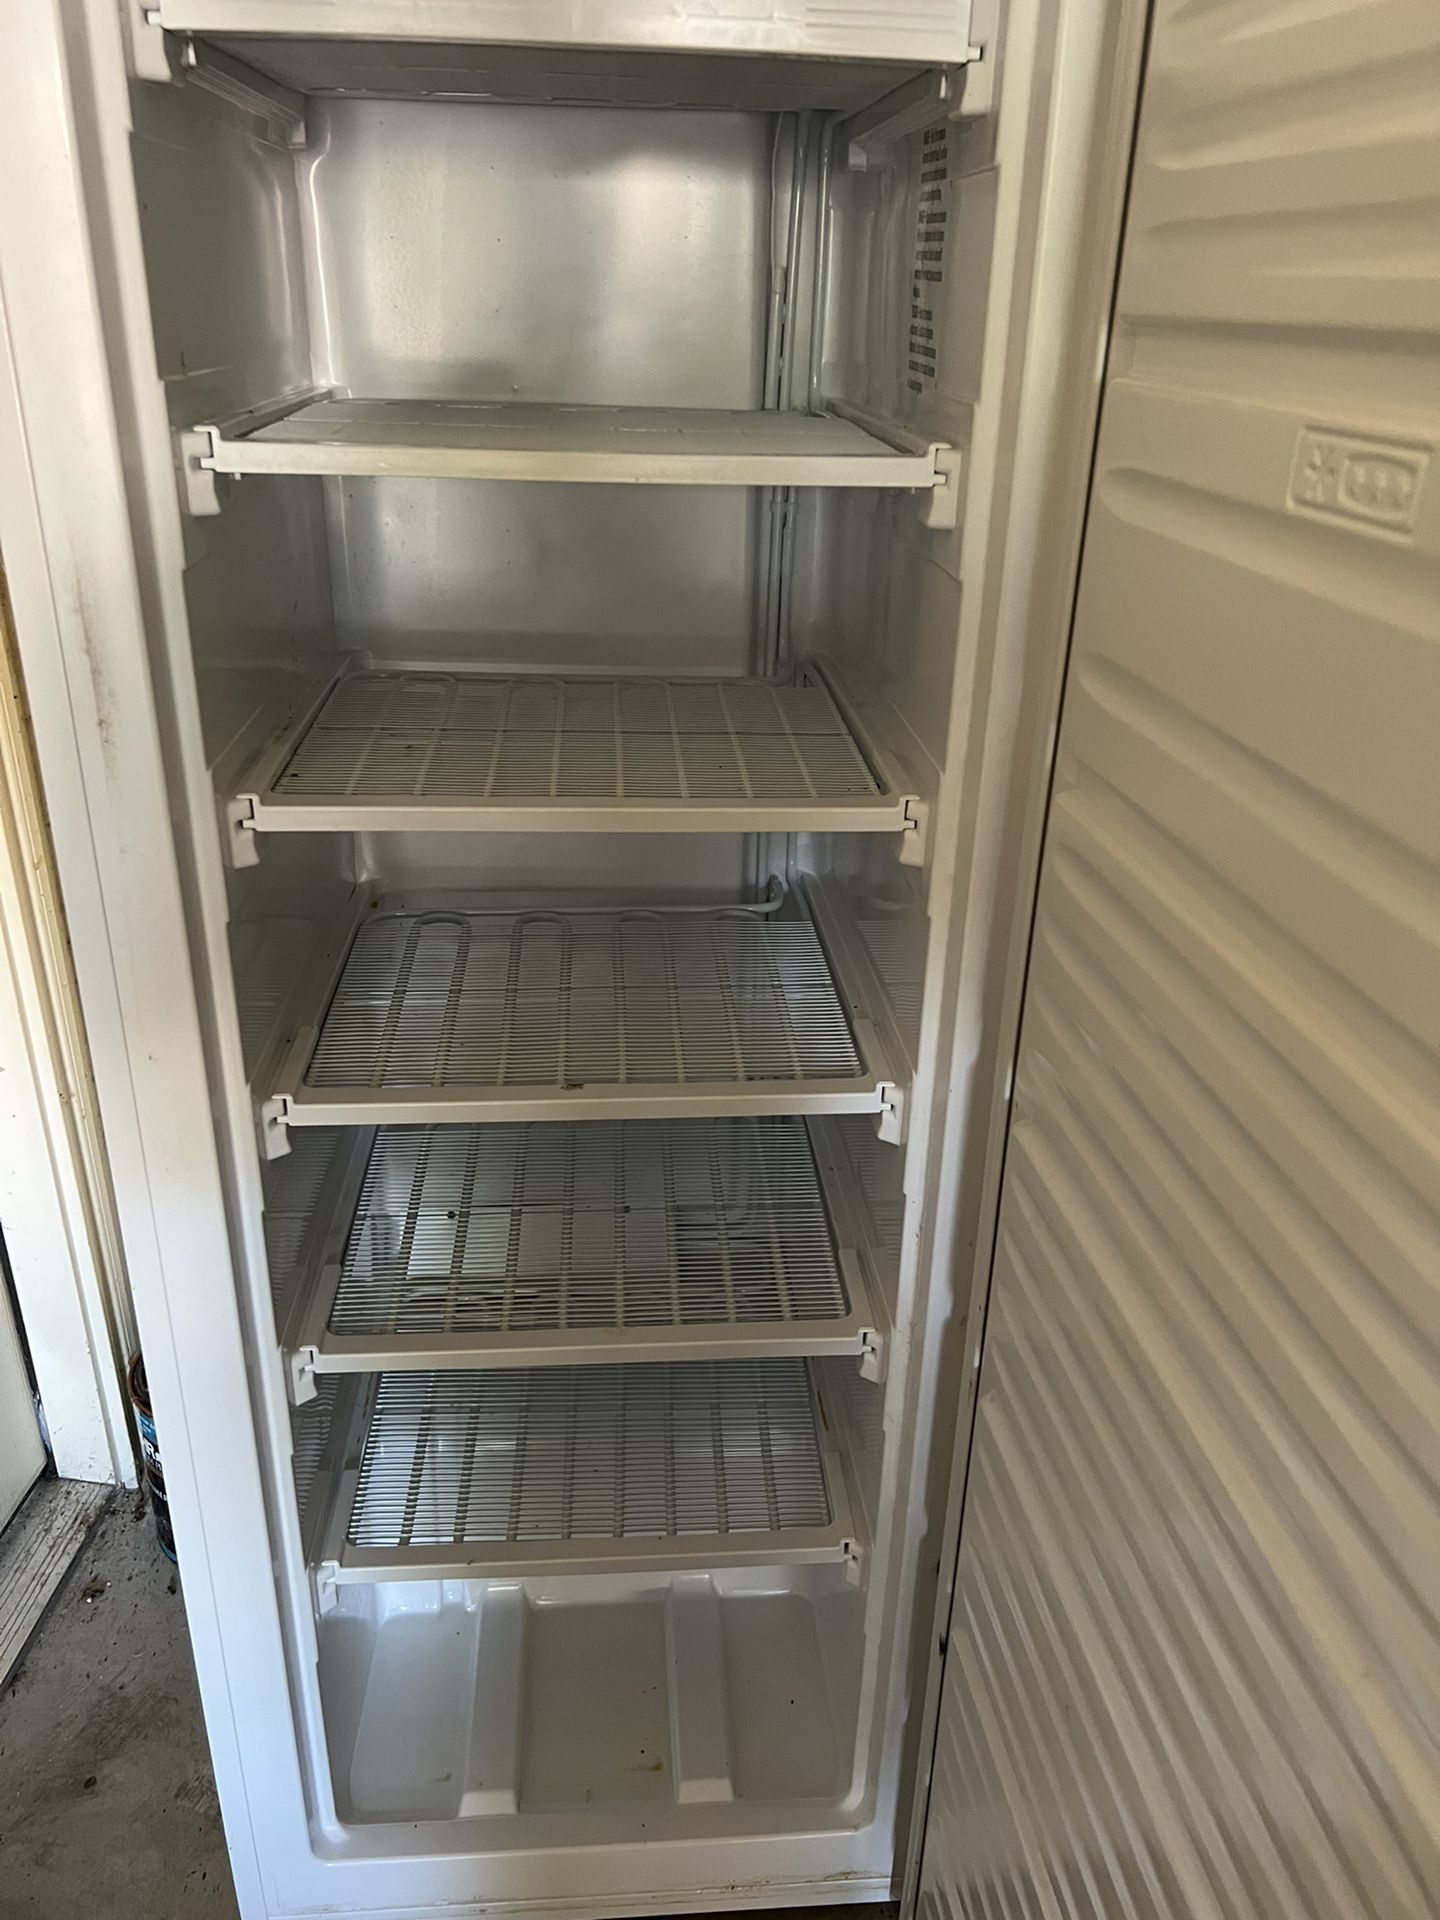 Magic Chef Upright Freezer In White For Sale In Pflugerville Tx Offerup